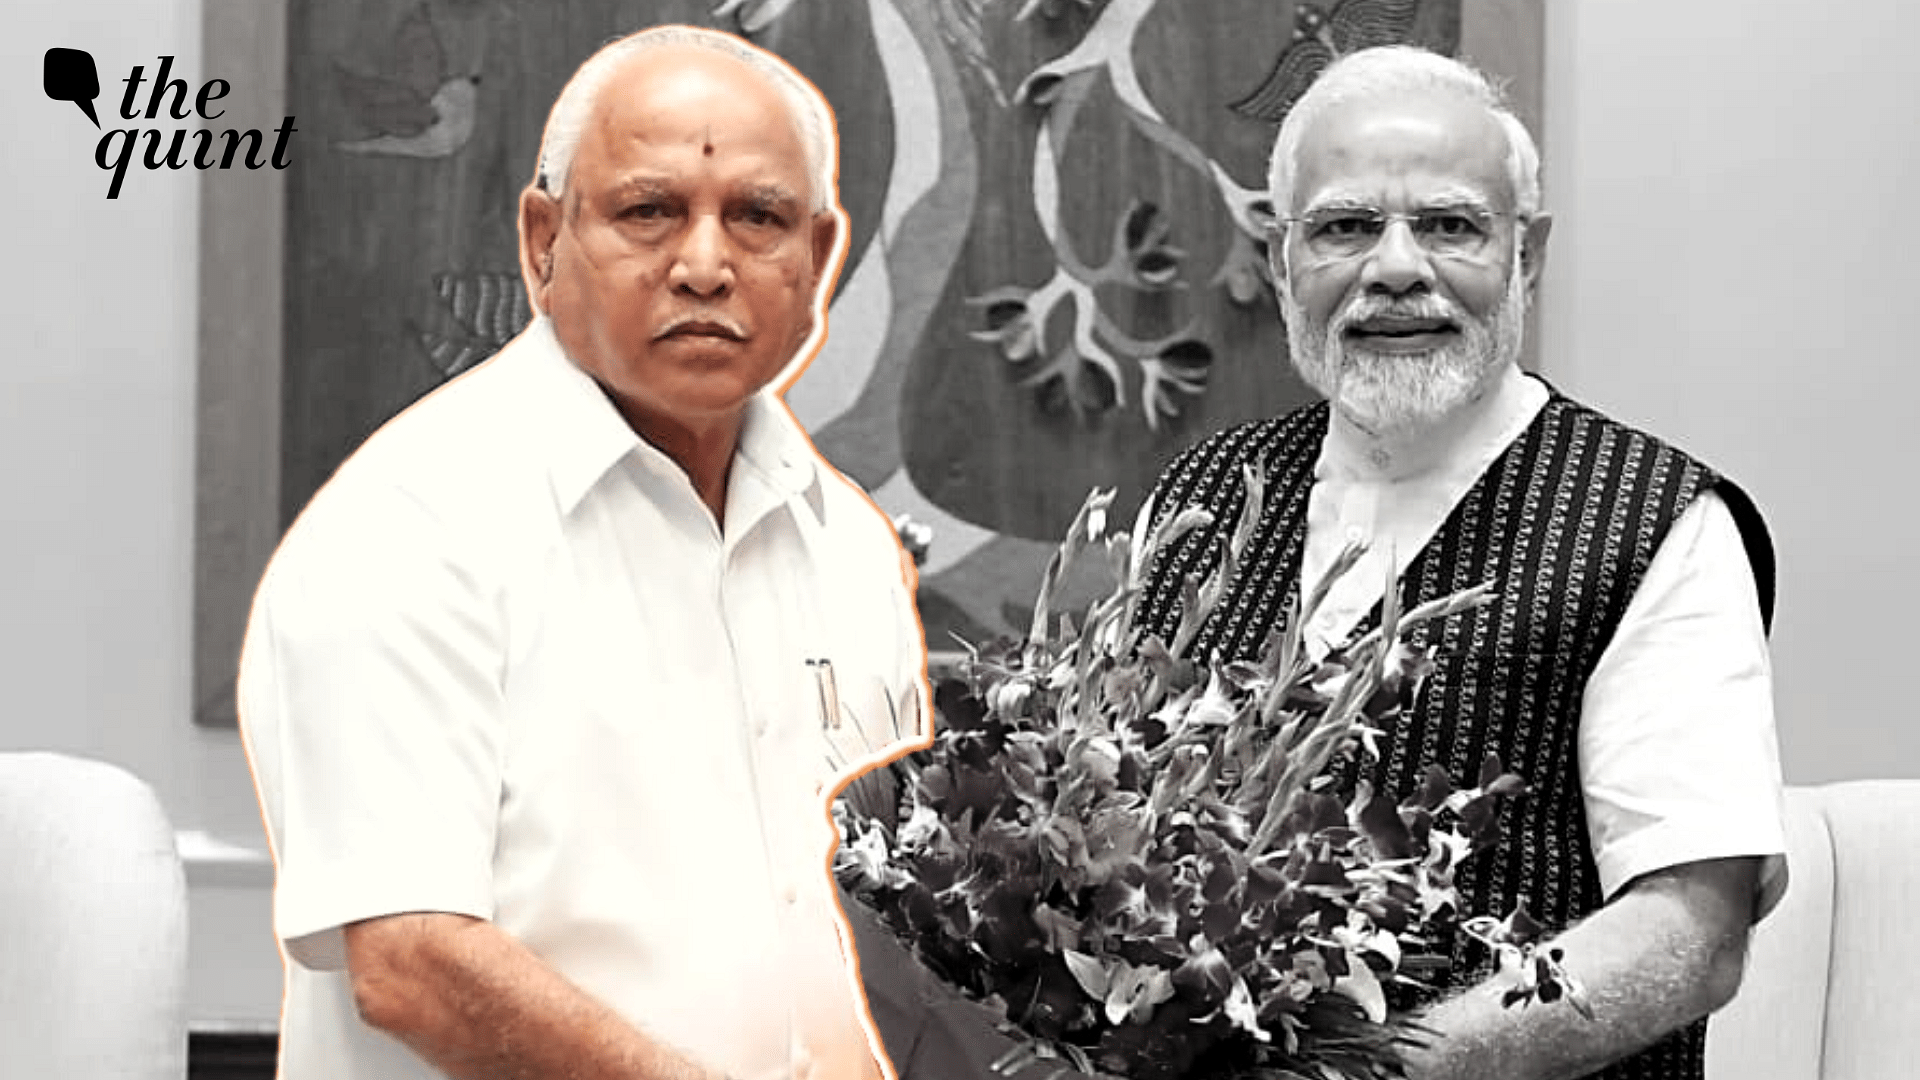 <div class="paragraphs"><p>What is the infighting about? Will this factionlism impact the BJP's chances? Can BS Yediyurappa retain favor of the party? <strong>The Quint</strong> answers.</p></div>